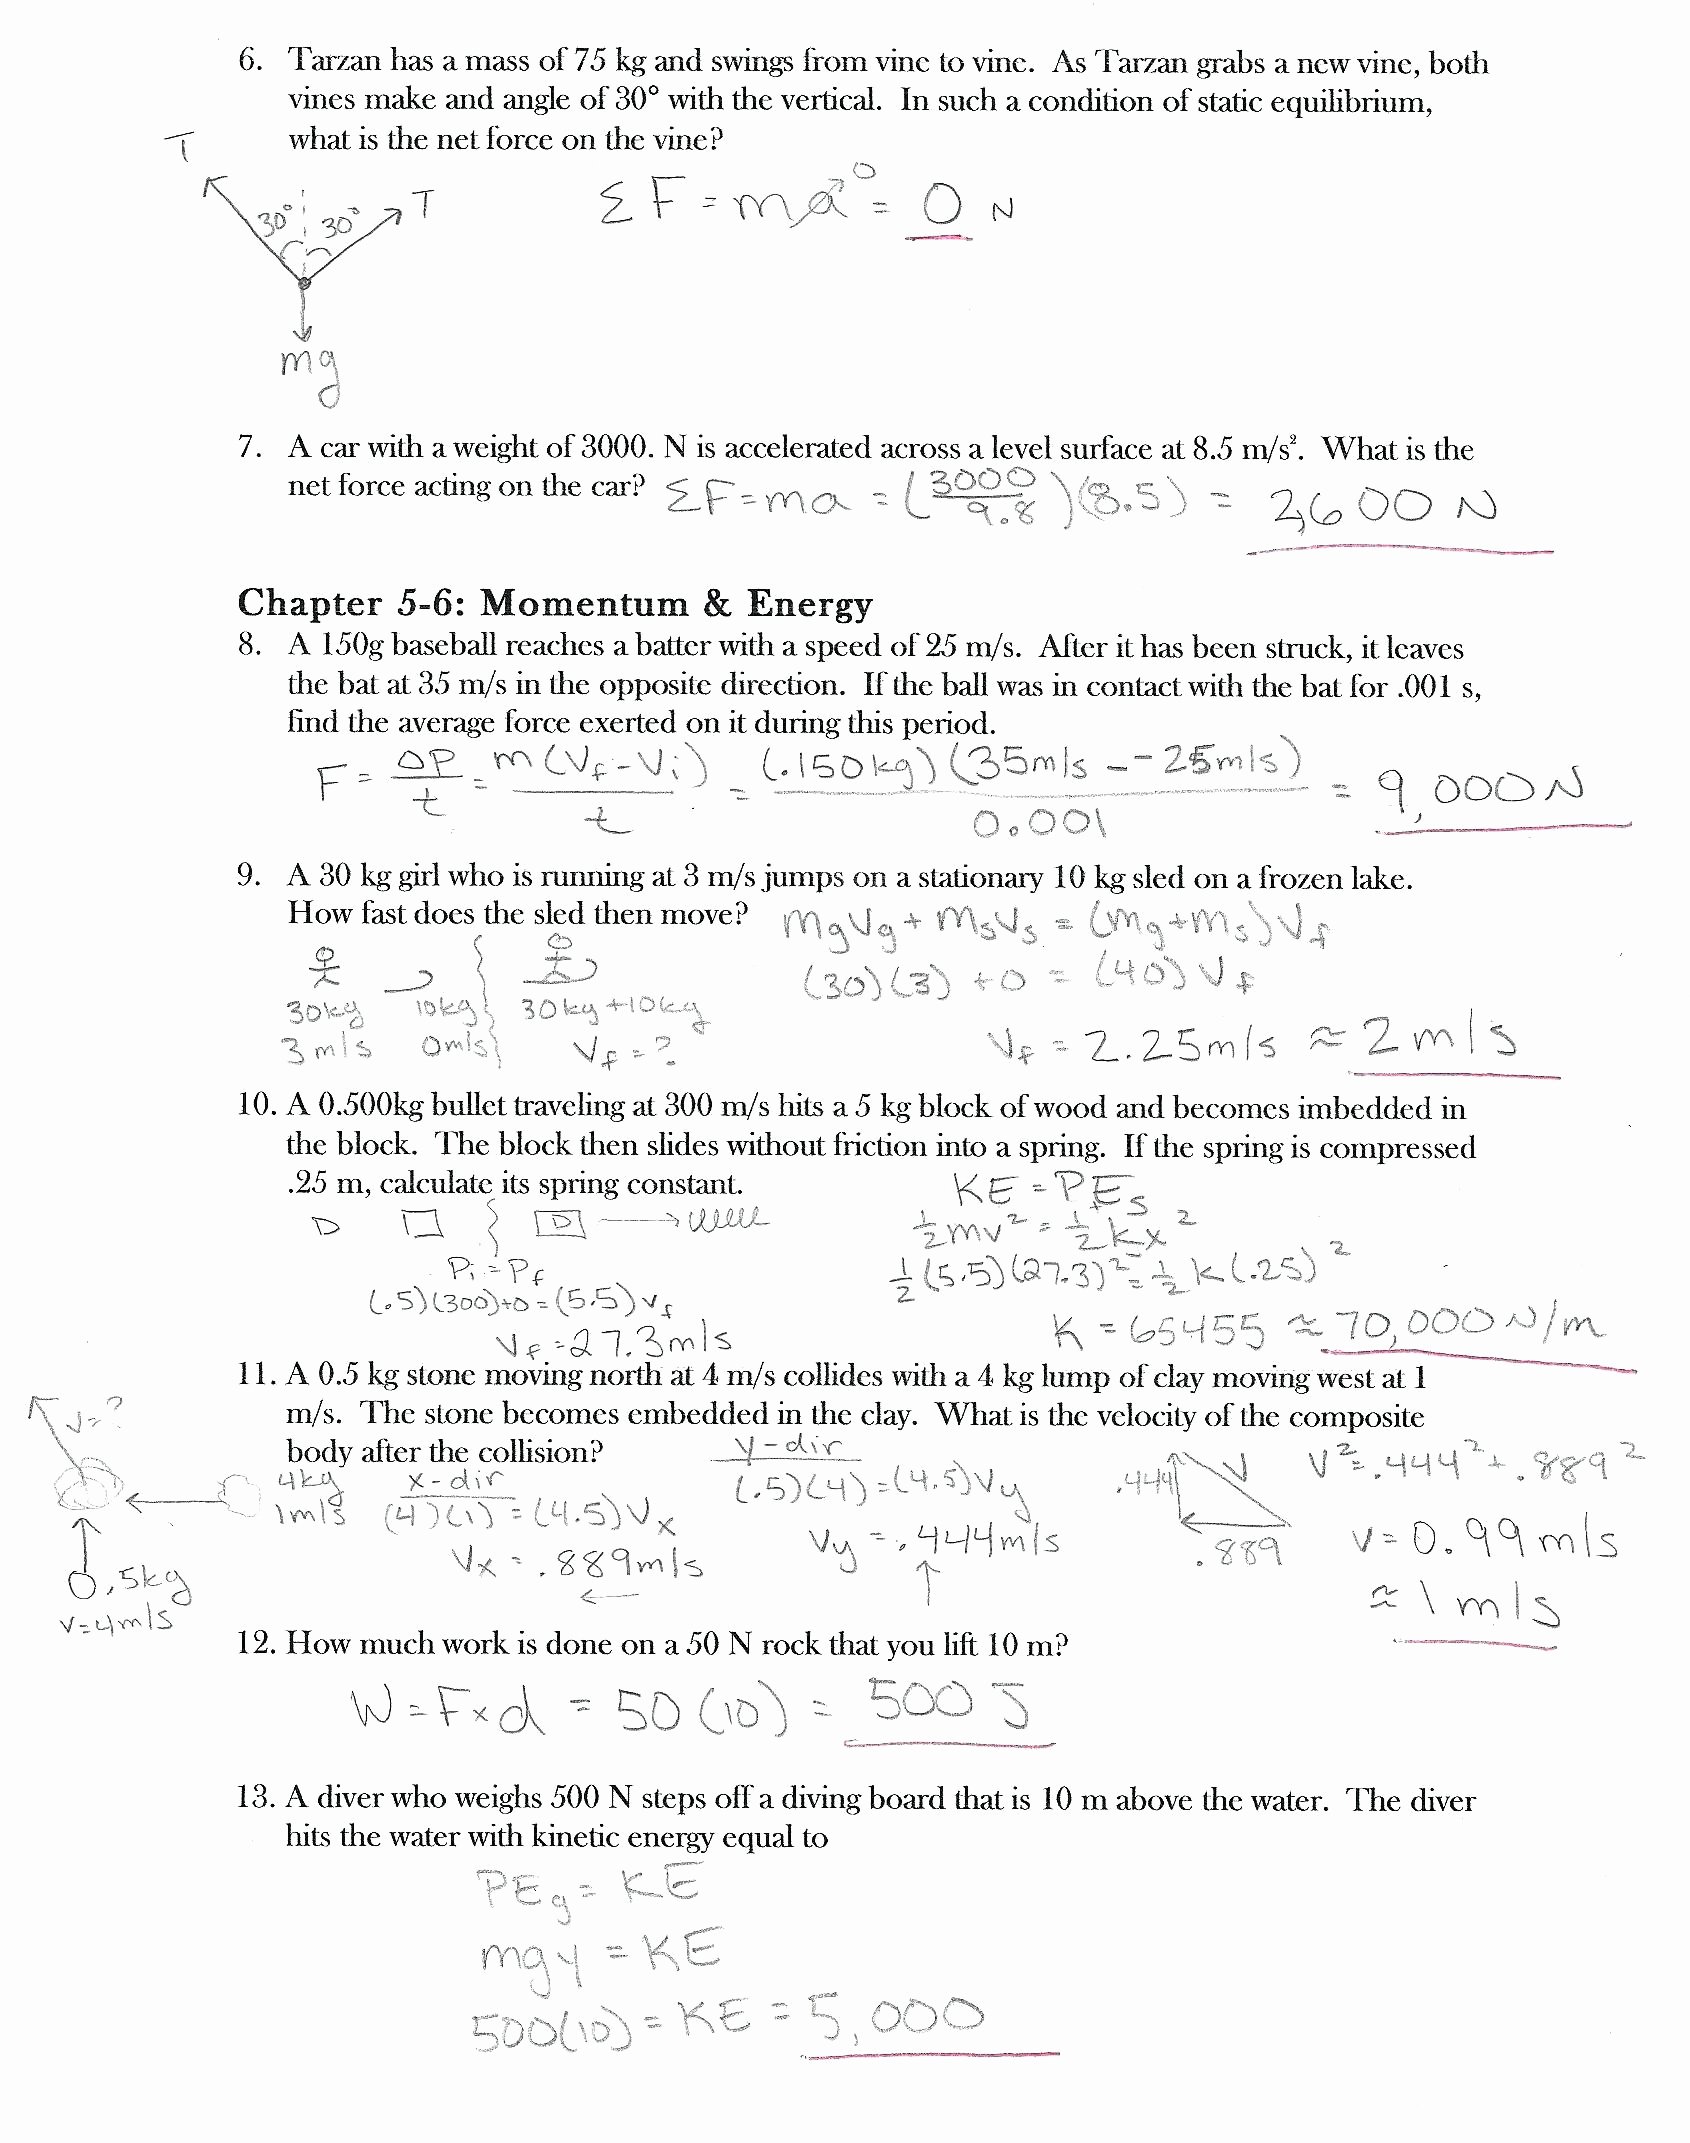 Introduction to Energy Worksheet New Introduction to Energy Worksheet Answers Energy Etfs